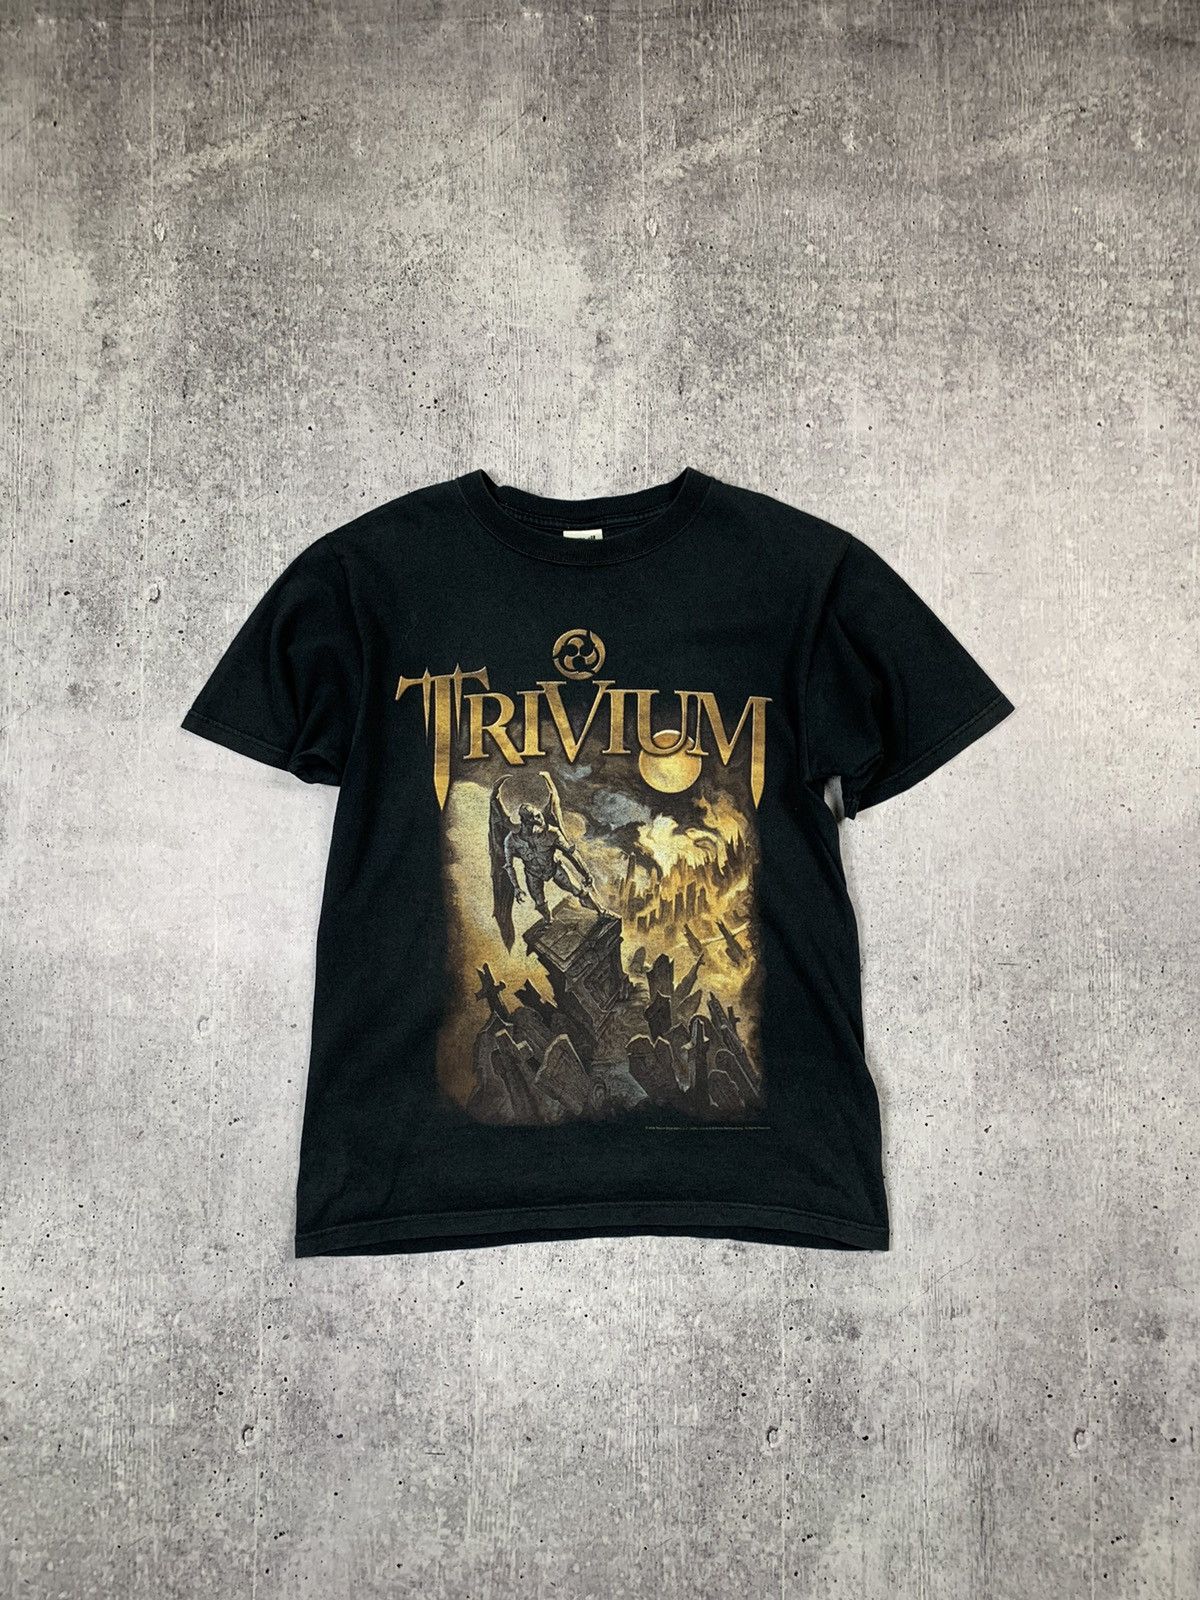 Pre-owned Band Tees X Vintage Trivium 2006 Crusade Tour Tee Metal Band T Shirt In Gray